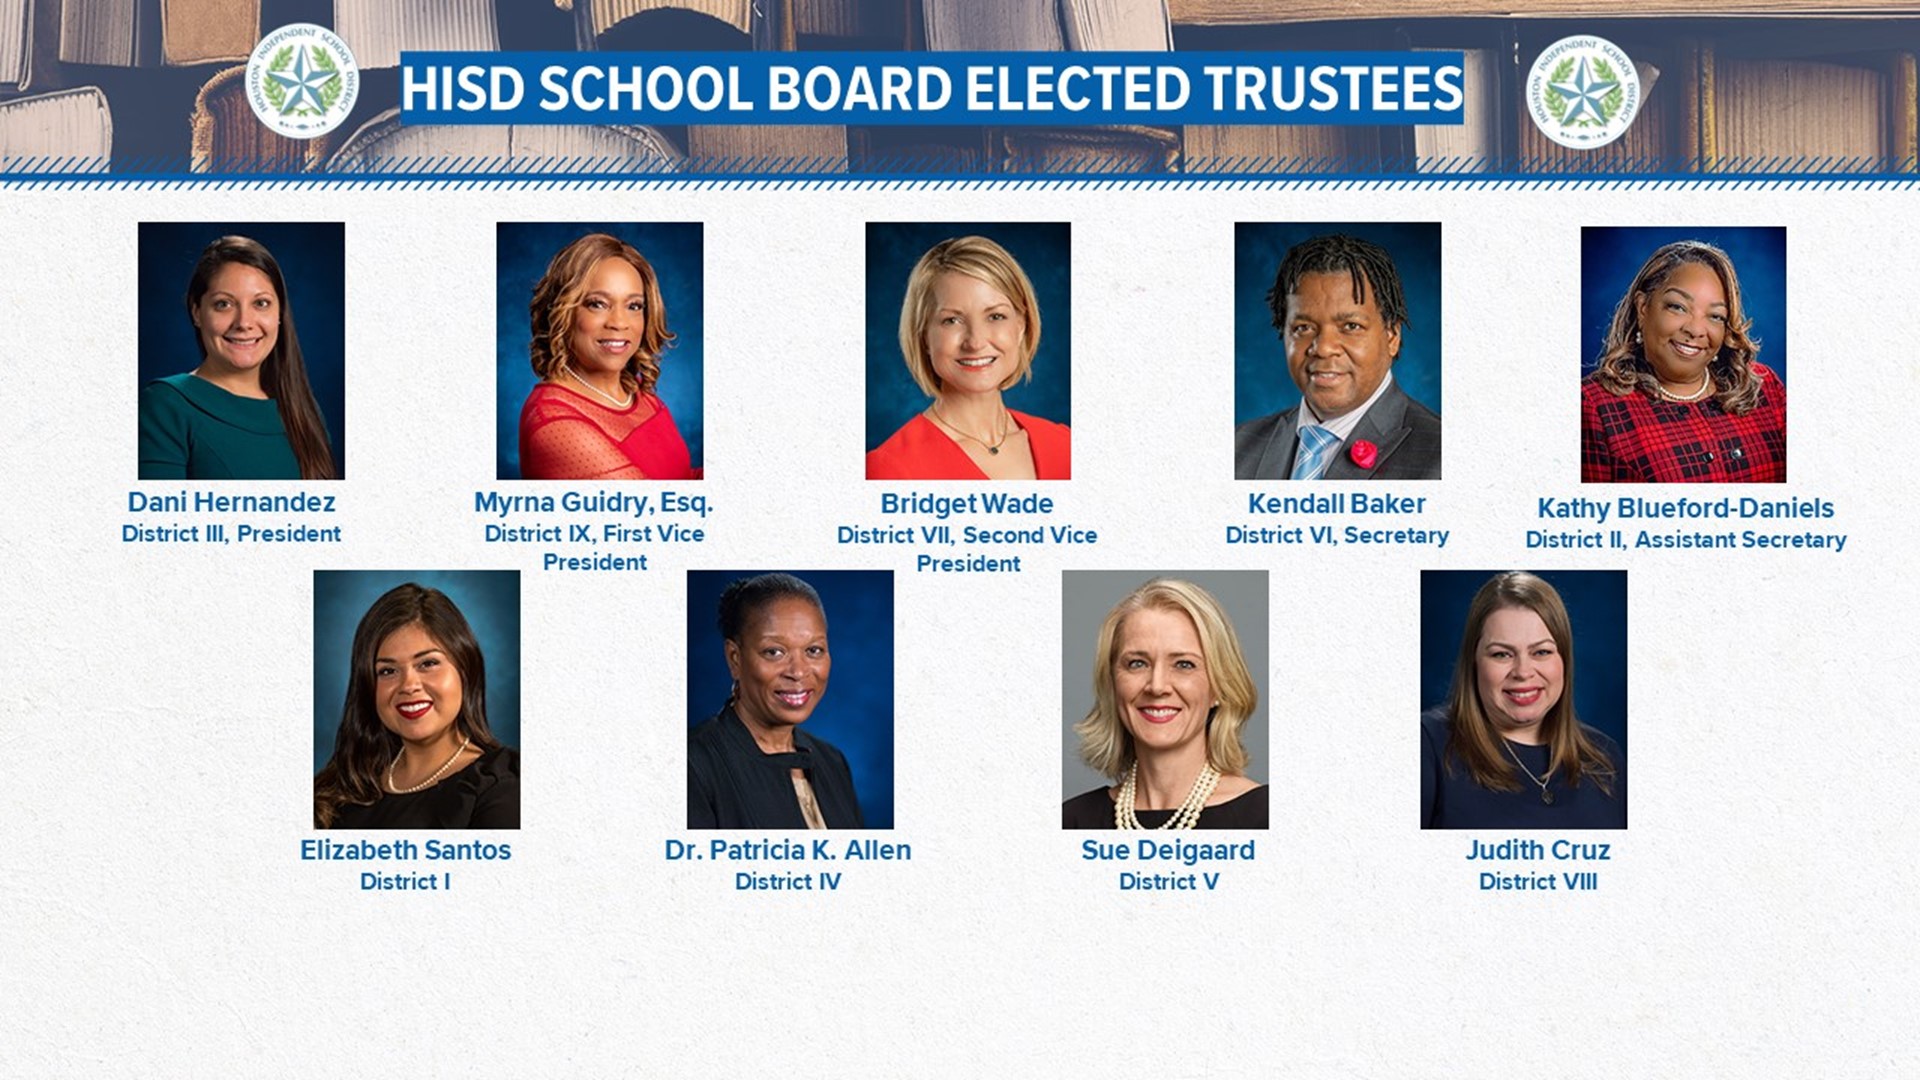 The nine trustees were elected to serve staggered four-year terms. They were elected from separate districts.